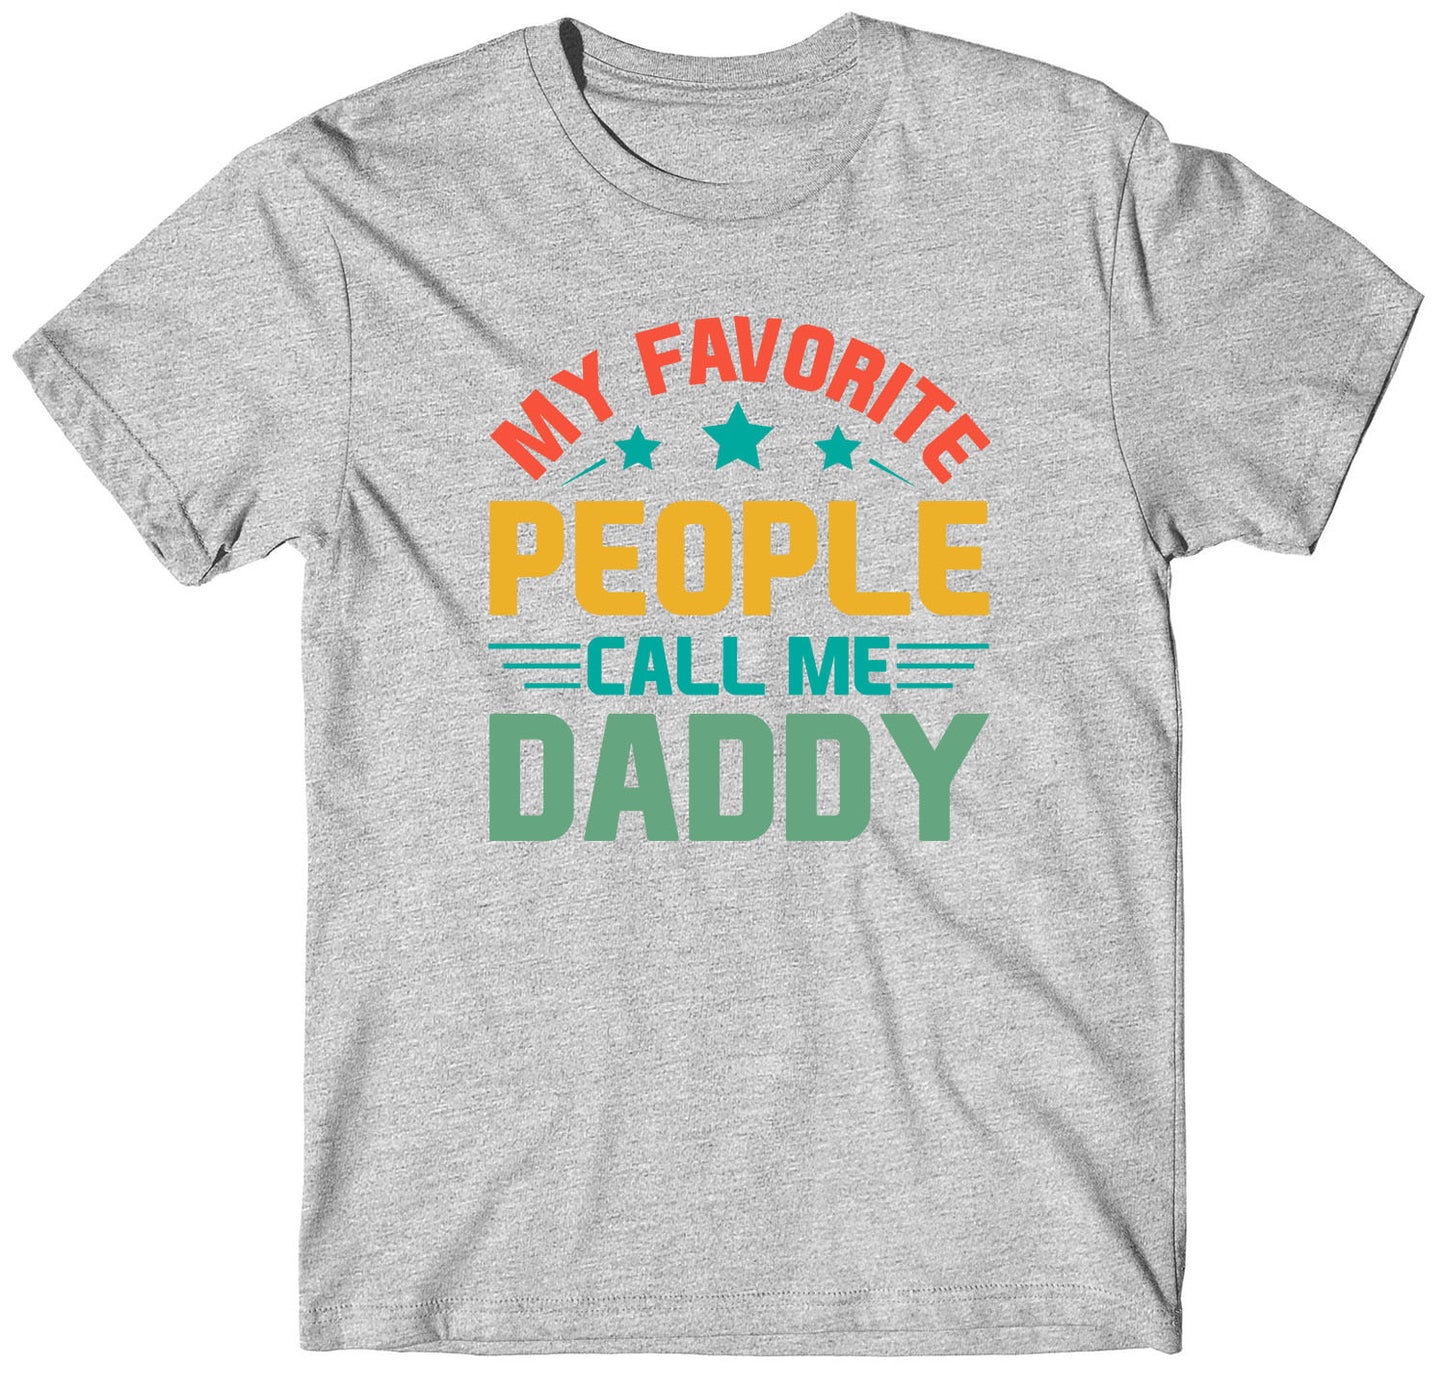 My Favorite People Call Me Custom Short Sleeve Fathers Day T-Shirts